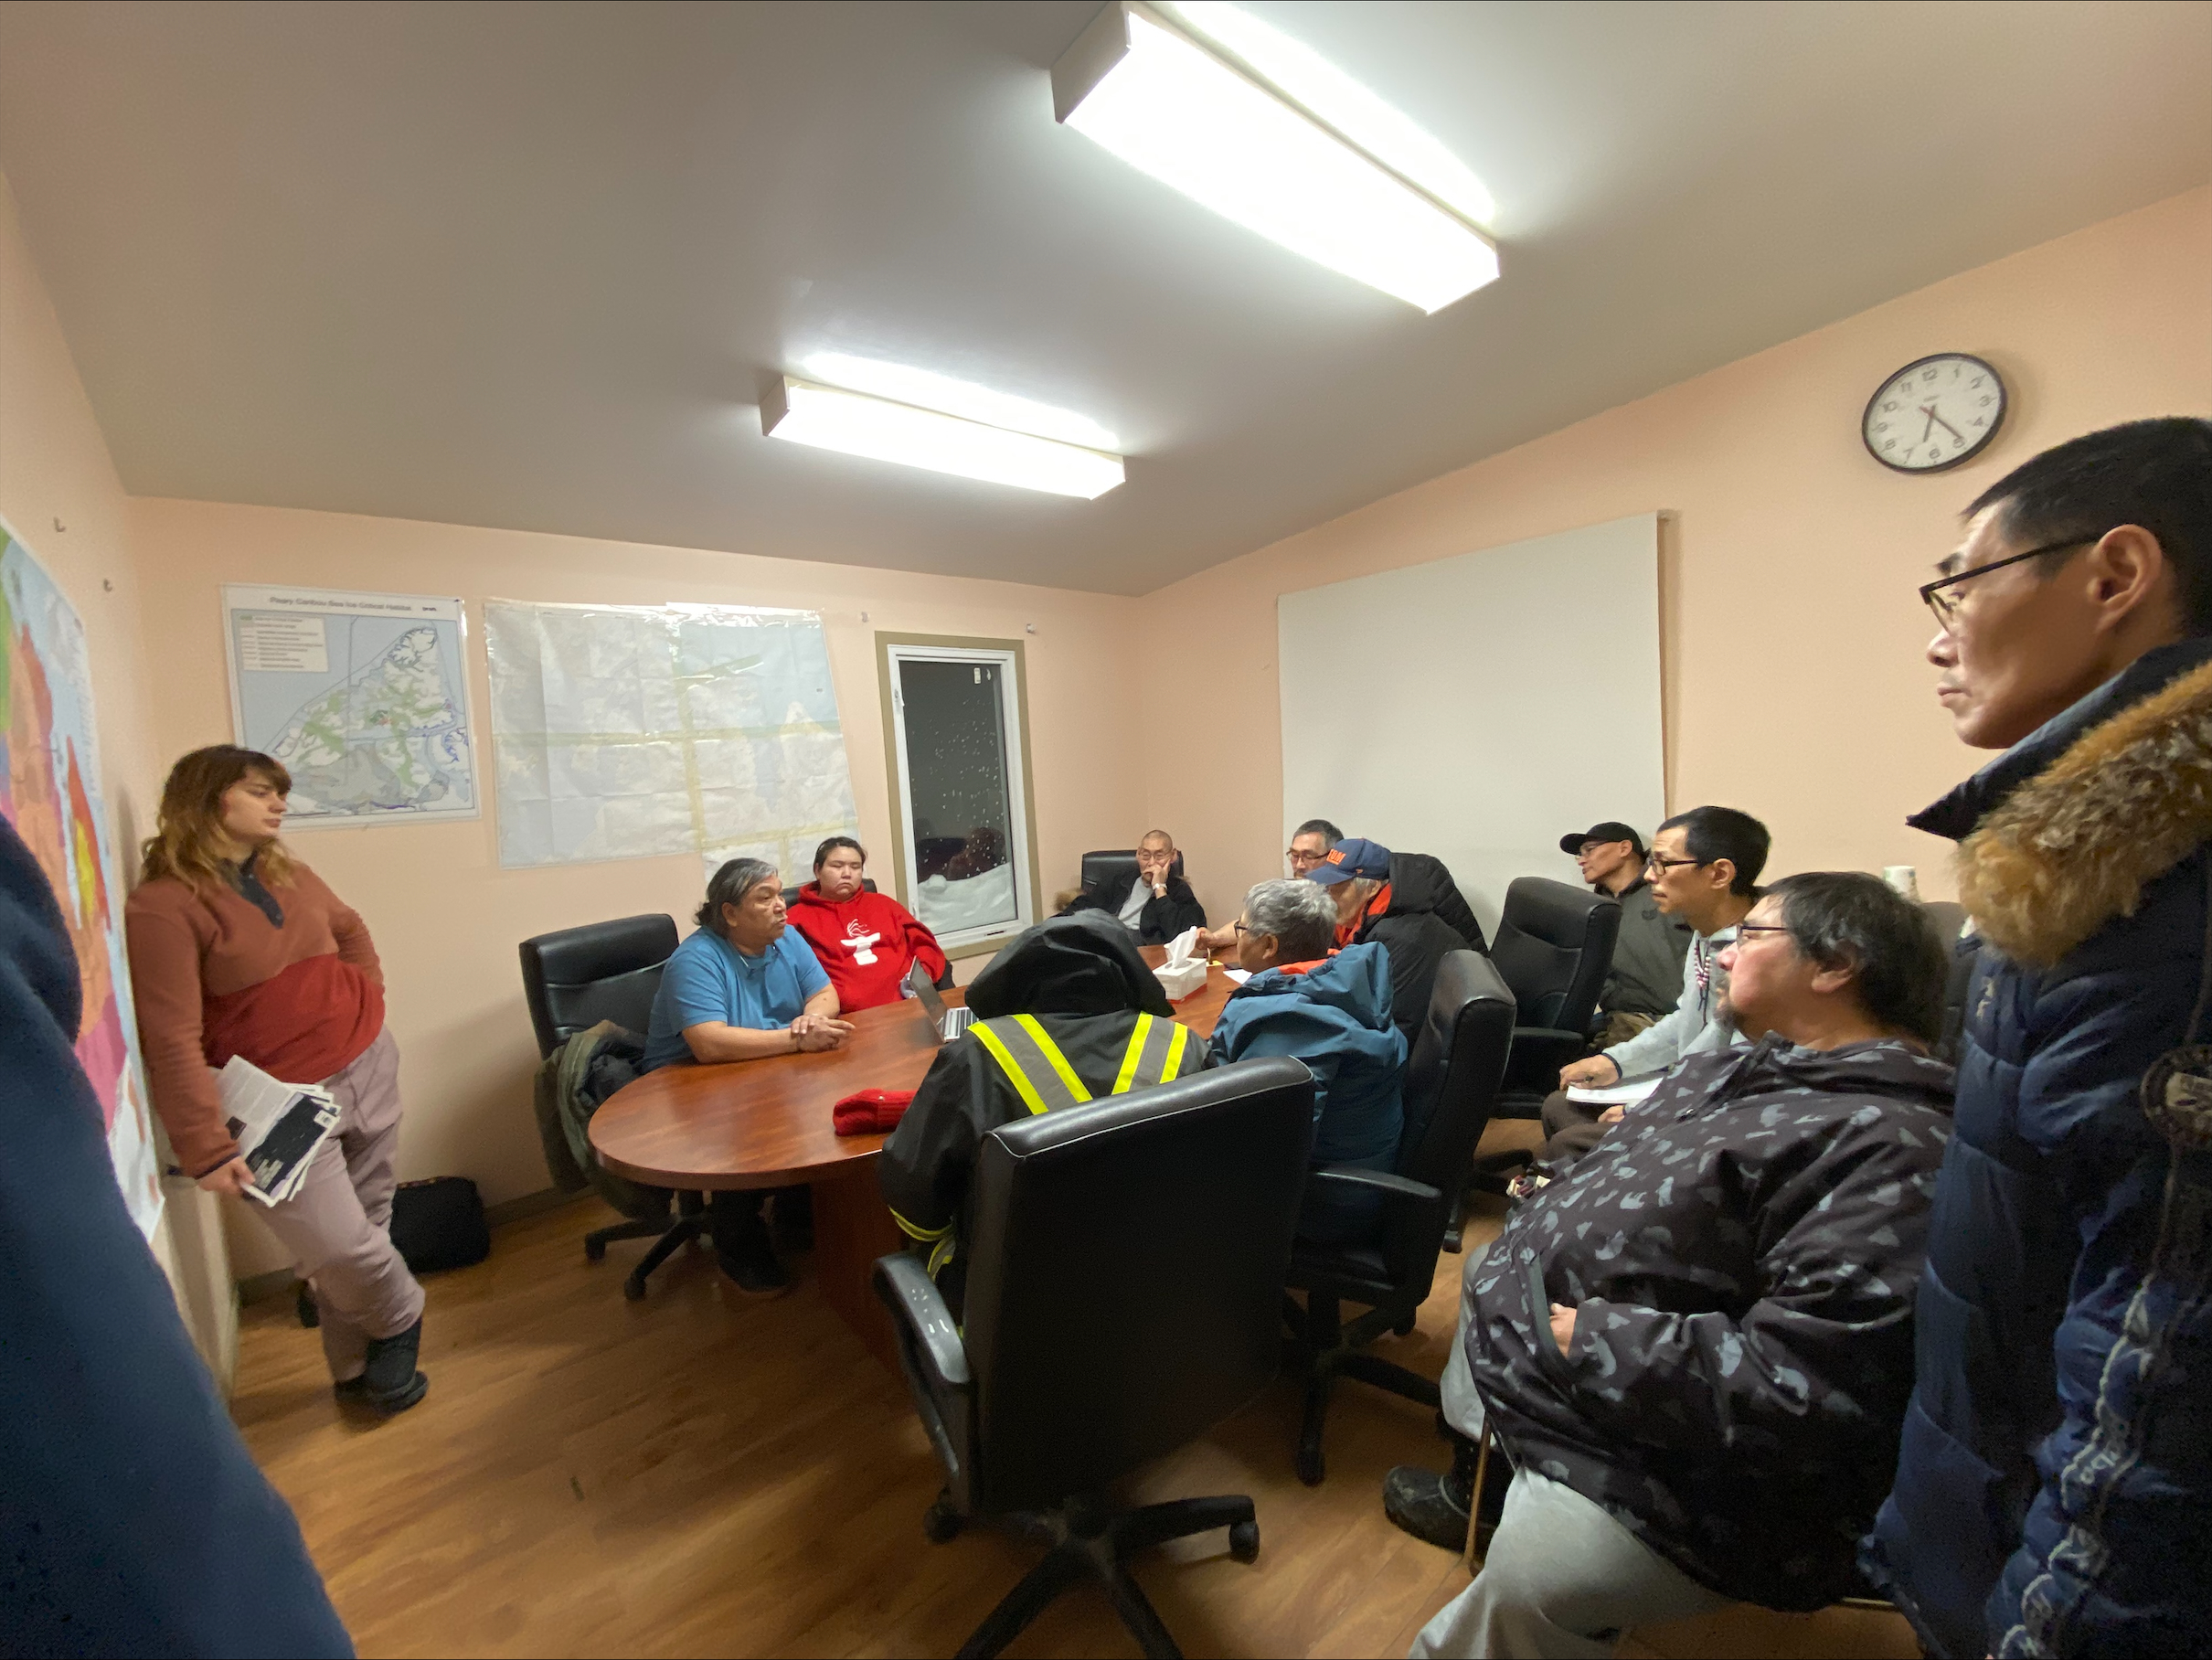 Group of people in a meeting room in the Nunavut community of Gjoa Haven